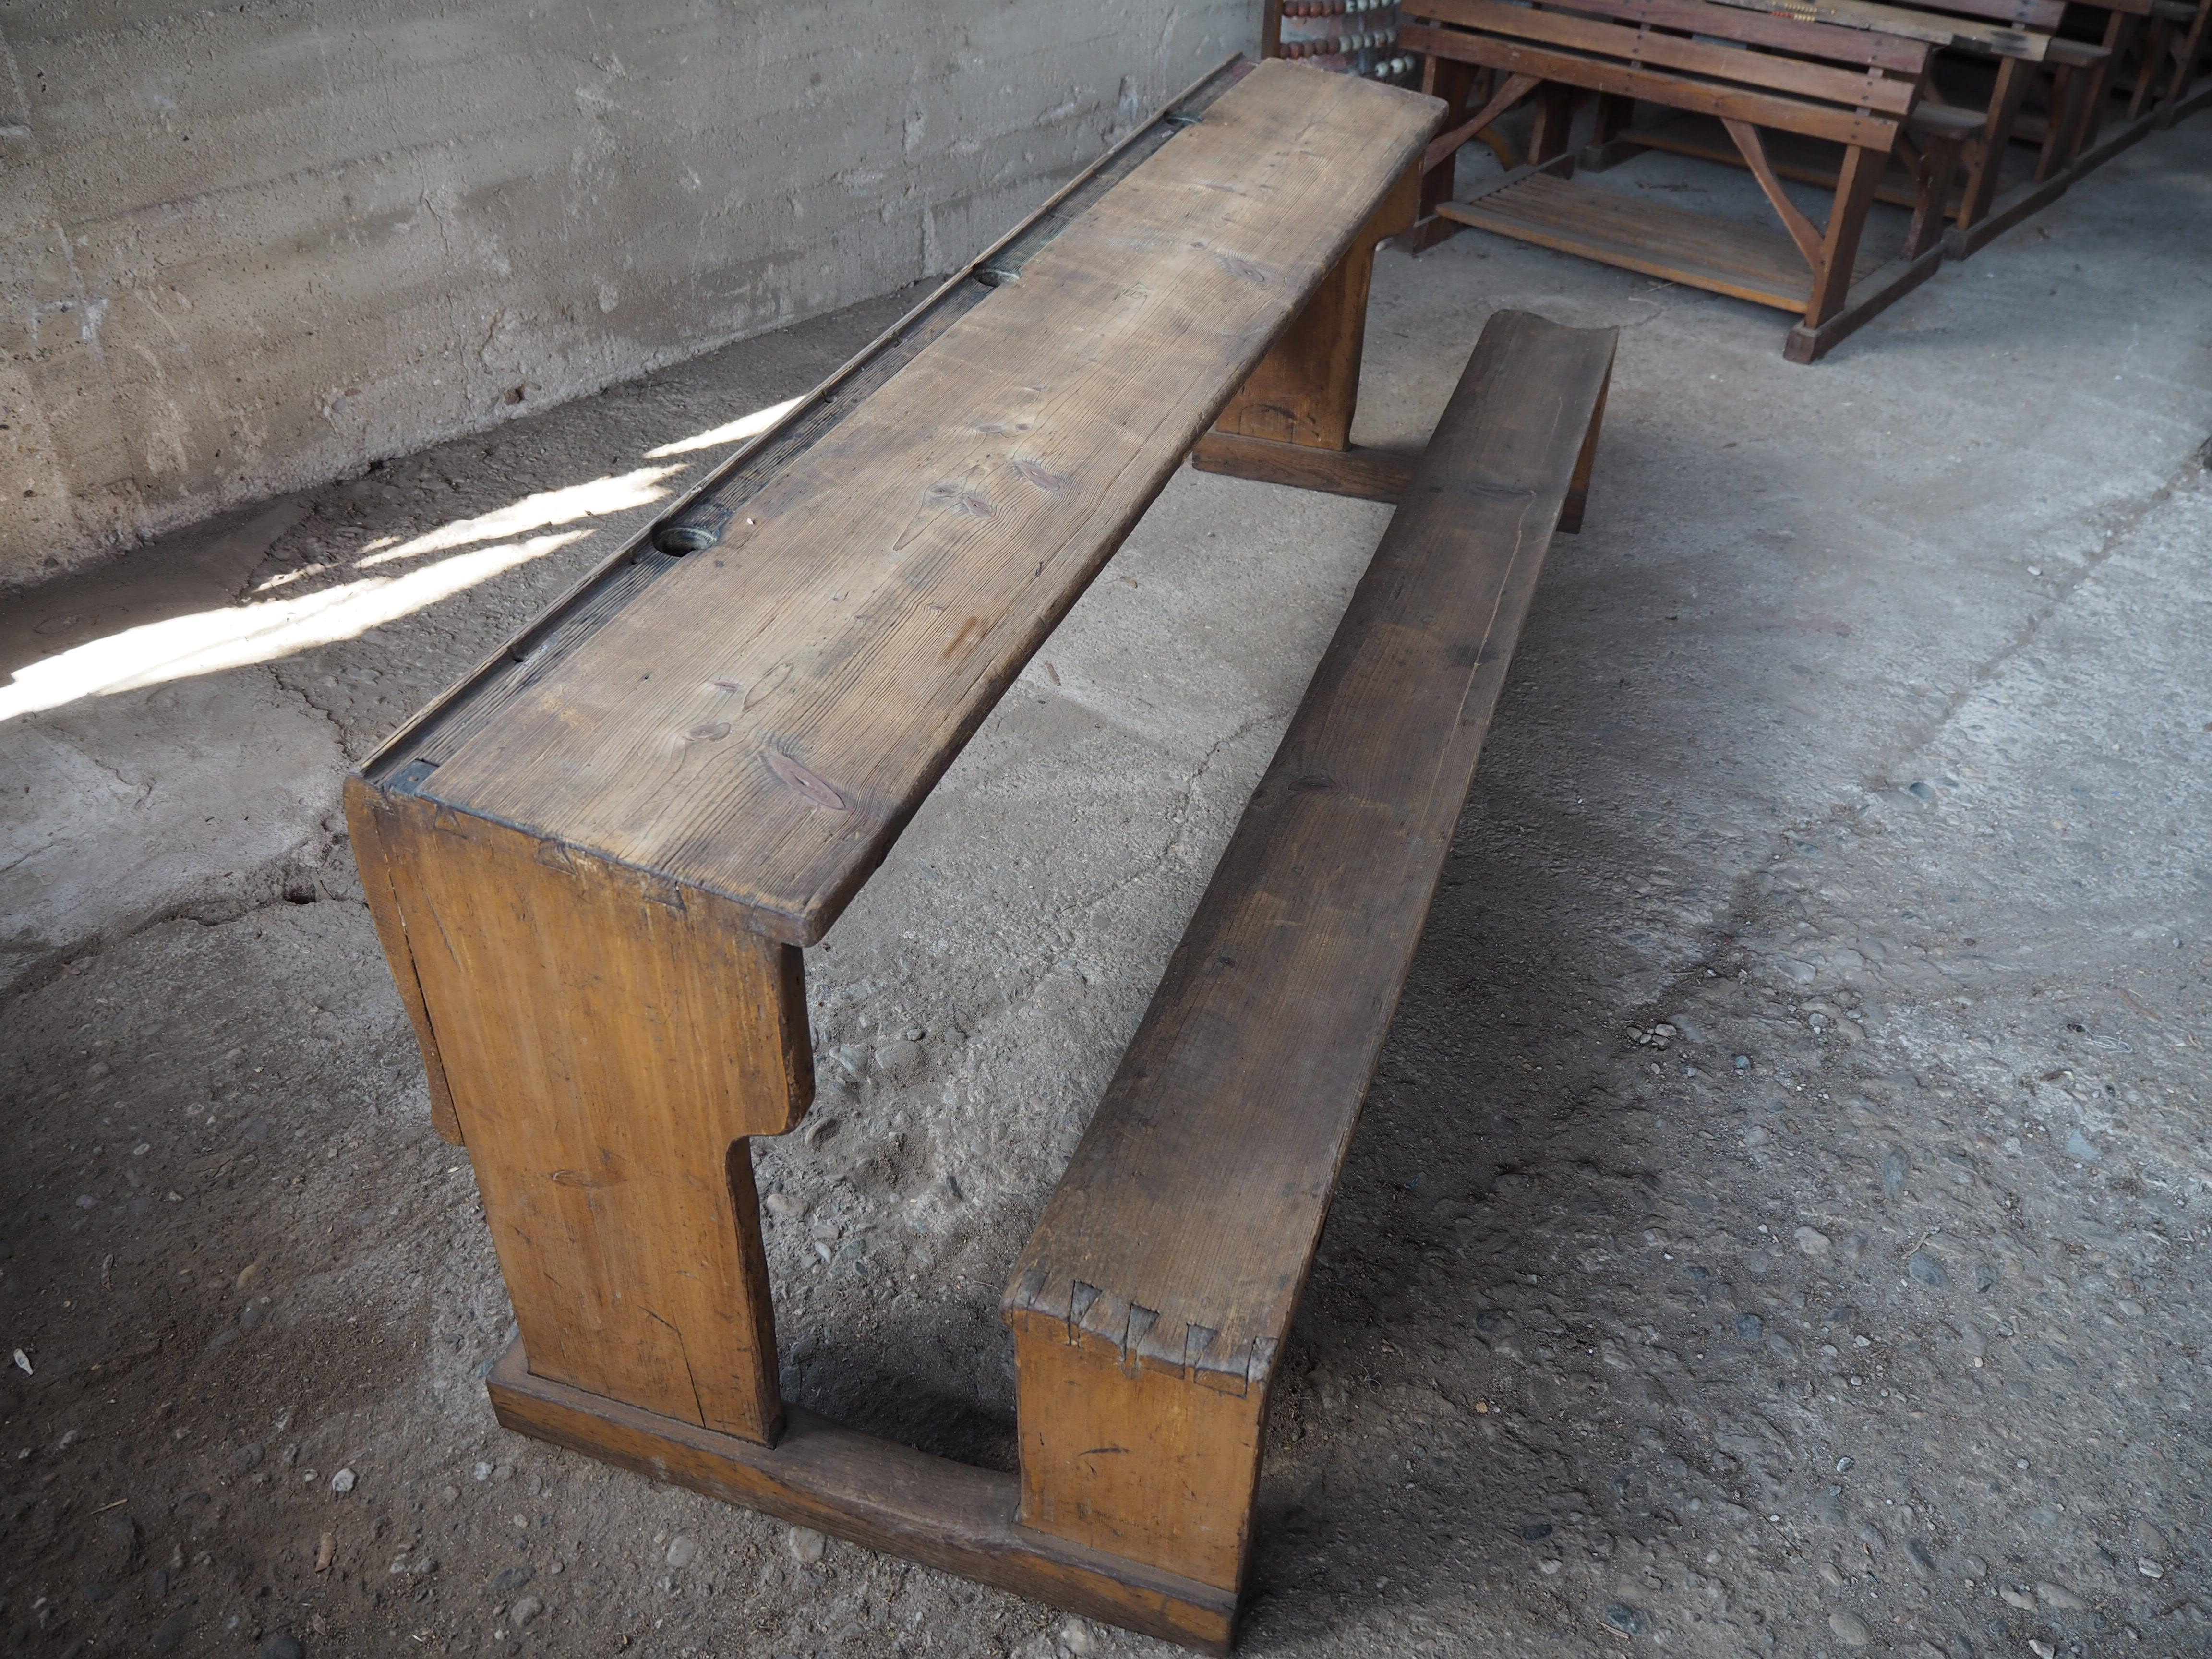 Other Antique Long All-Wood School Bench with Original Paint, 1930s